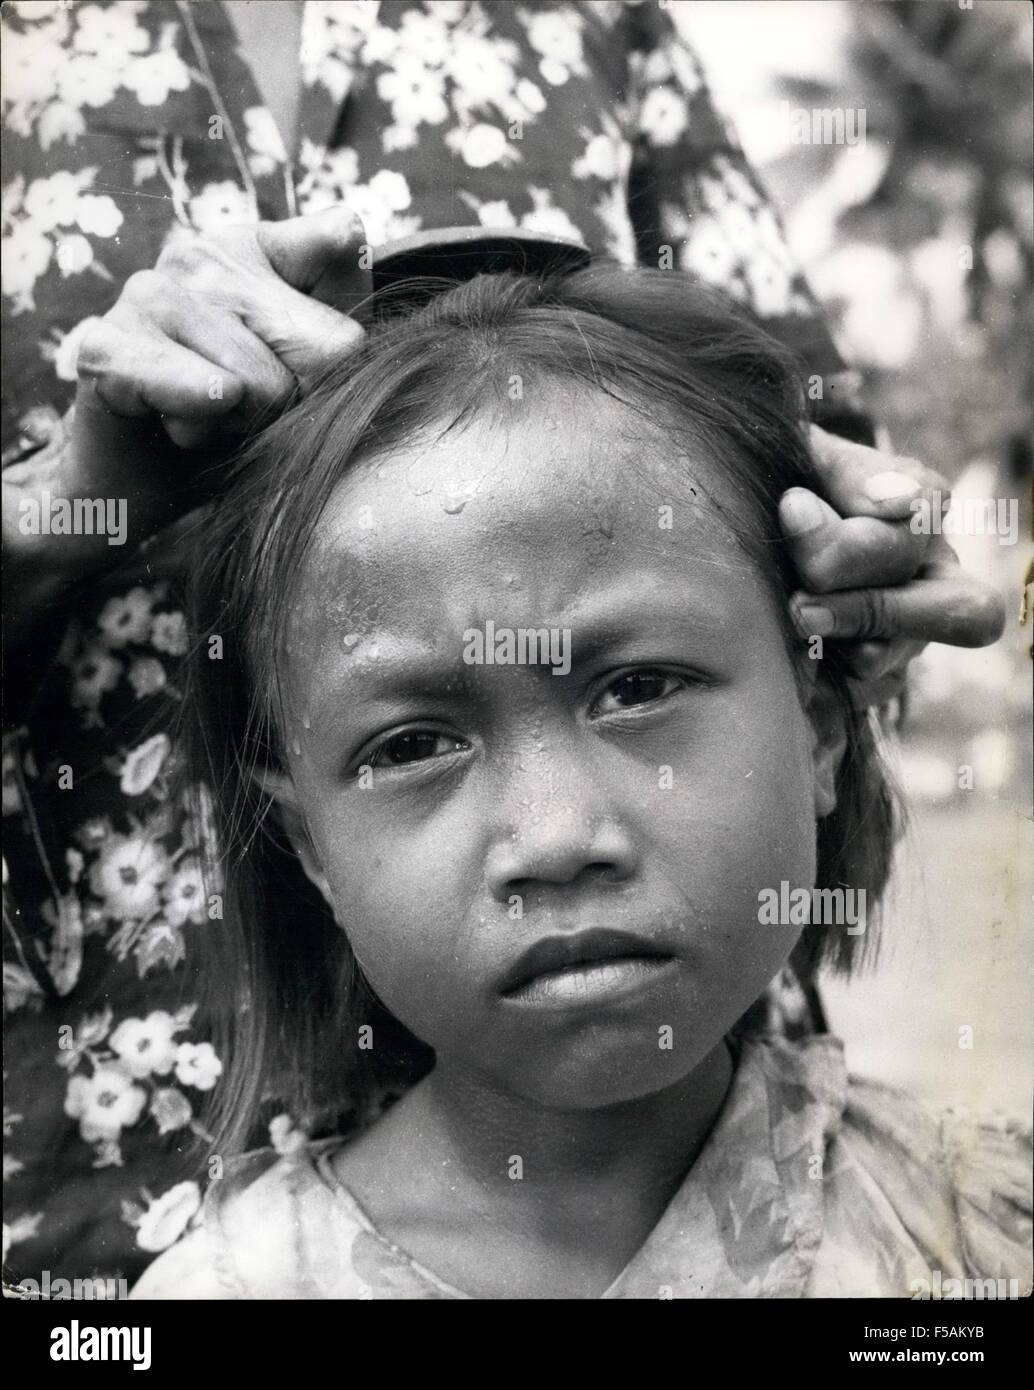 1968 - Leprosy is still a scourge in the East: Indonesia makes efforts to control it by opening Leprosariums: Almost entirely unknown today in the Western ... - 1968-leprosy-is-still-a-scourge-in-the-east-indonesia-makes-efforts-F5AKYB